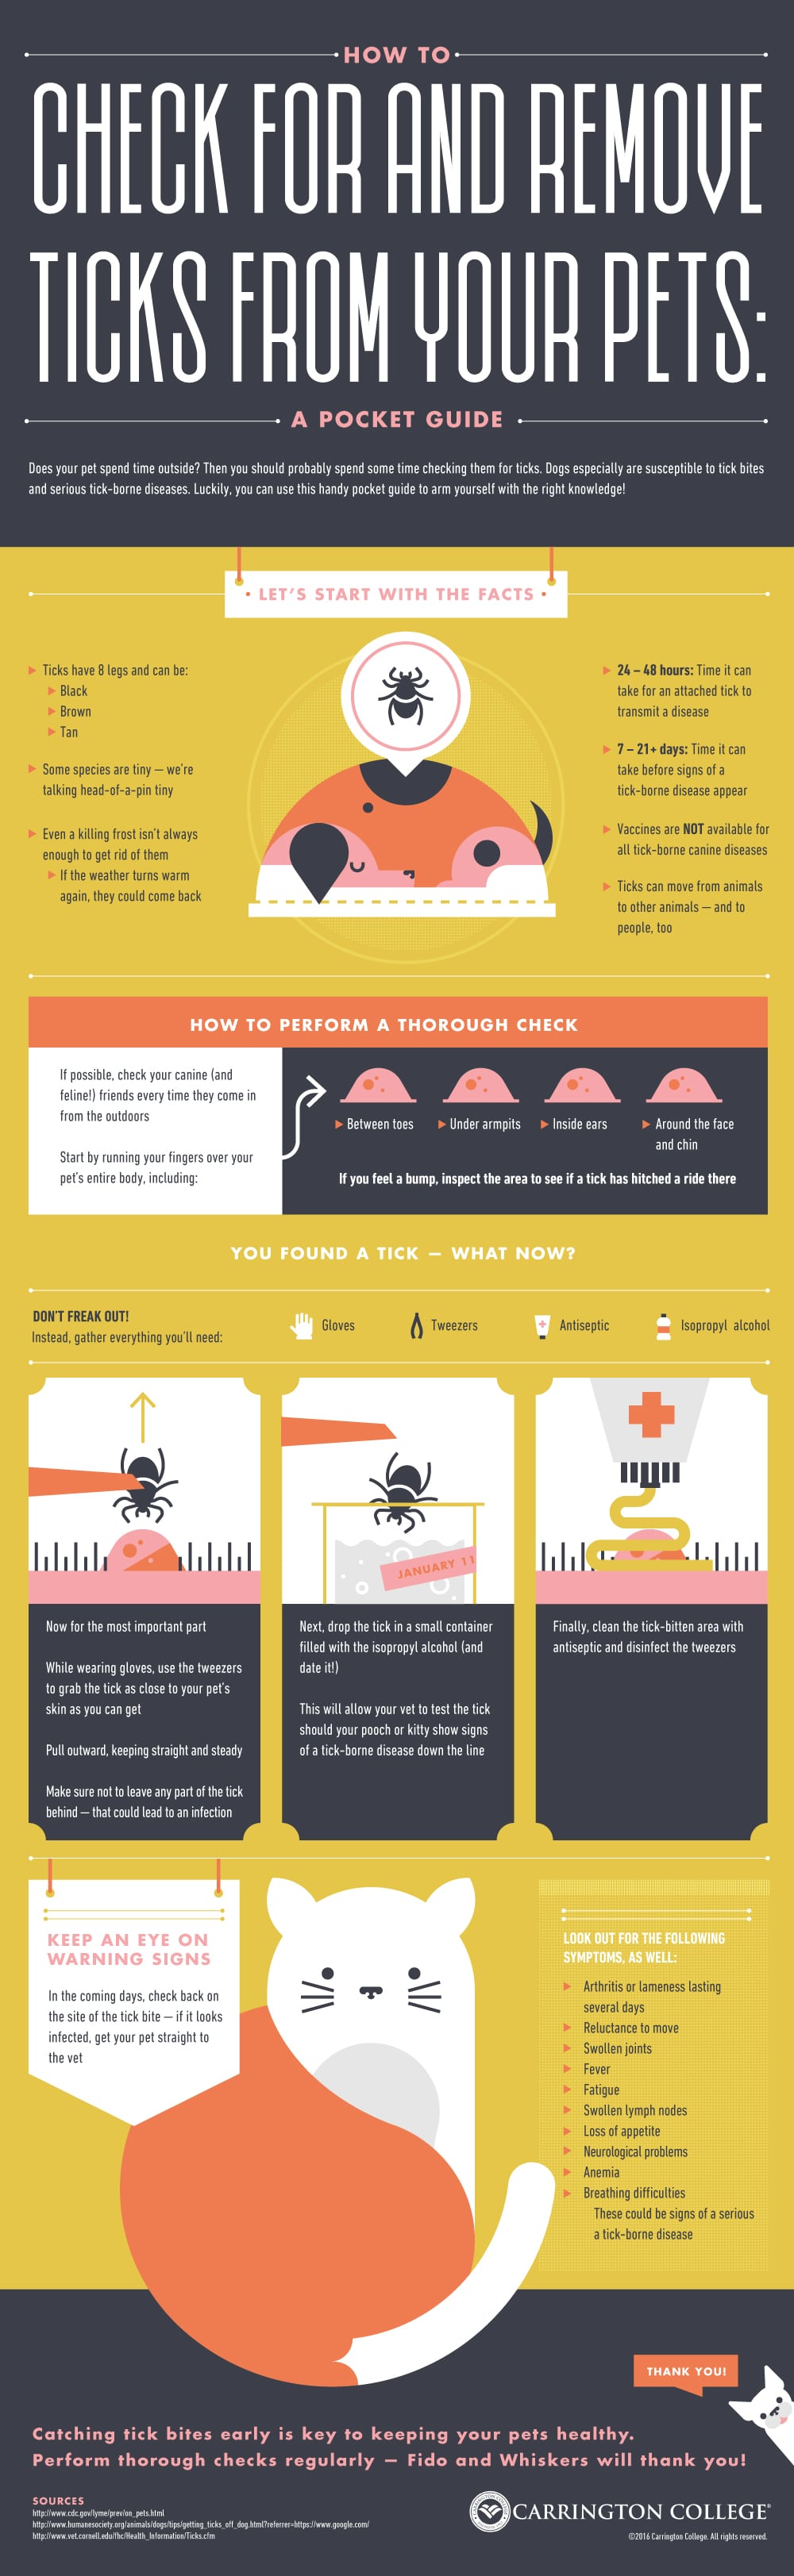 Check-For-and-Remove-Ticks-From-Your-Pets-Infographic-1